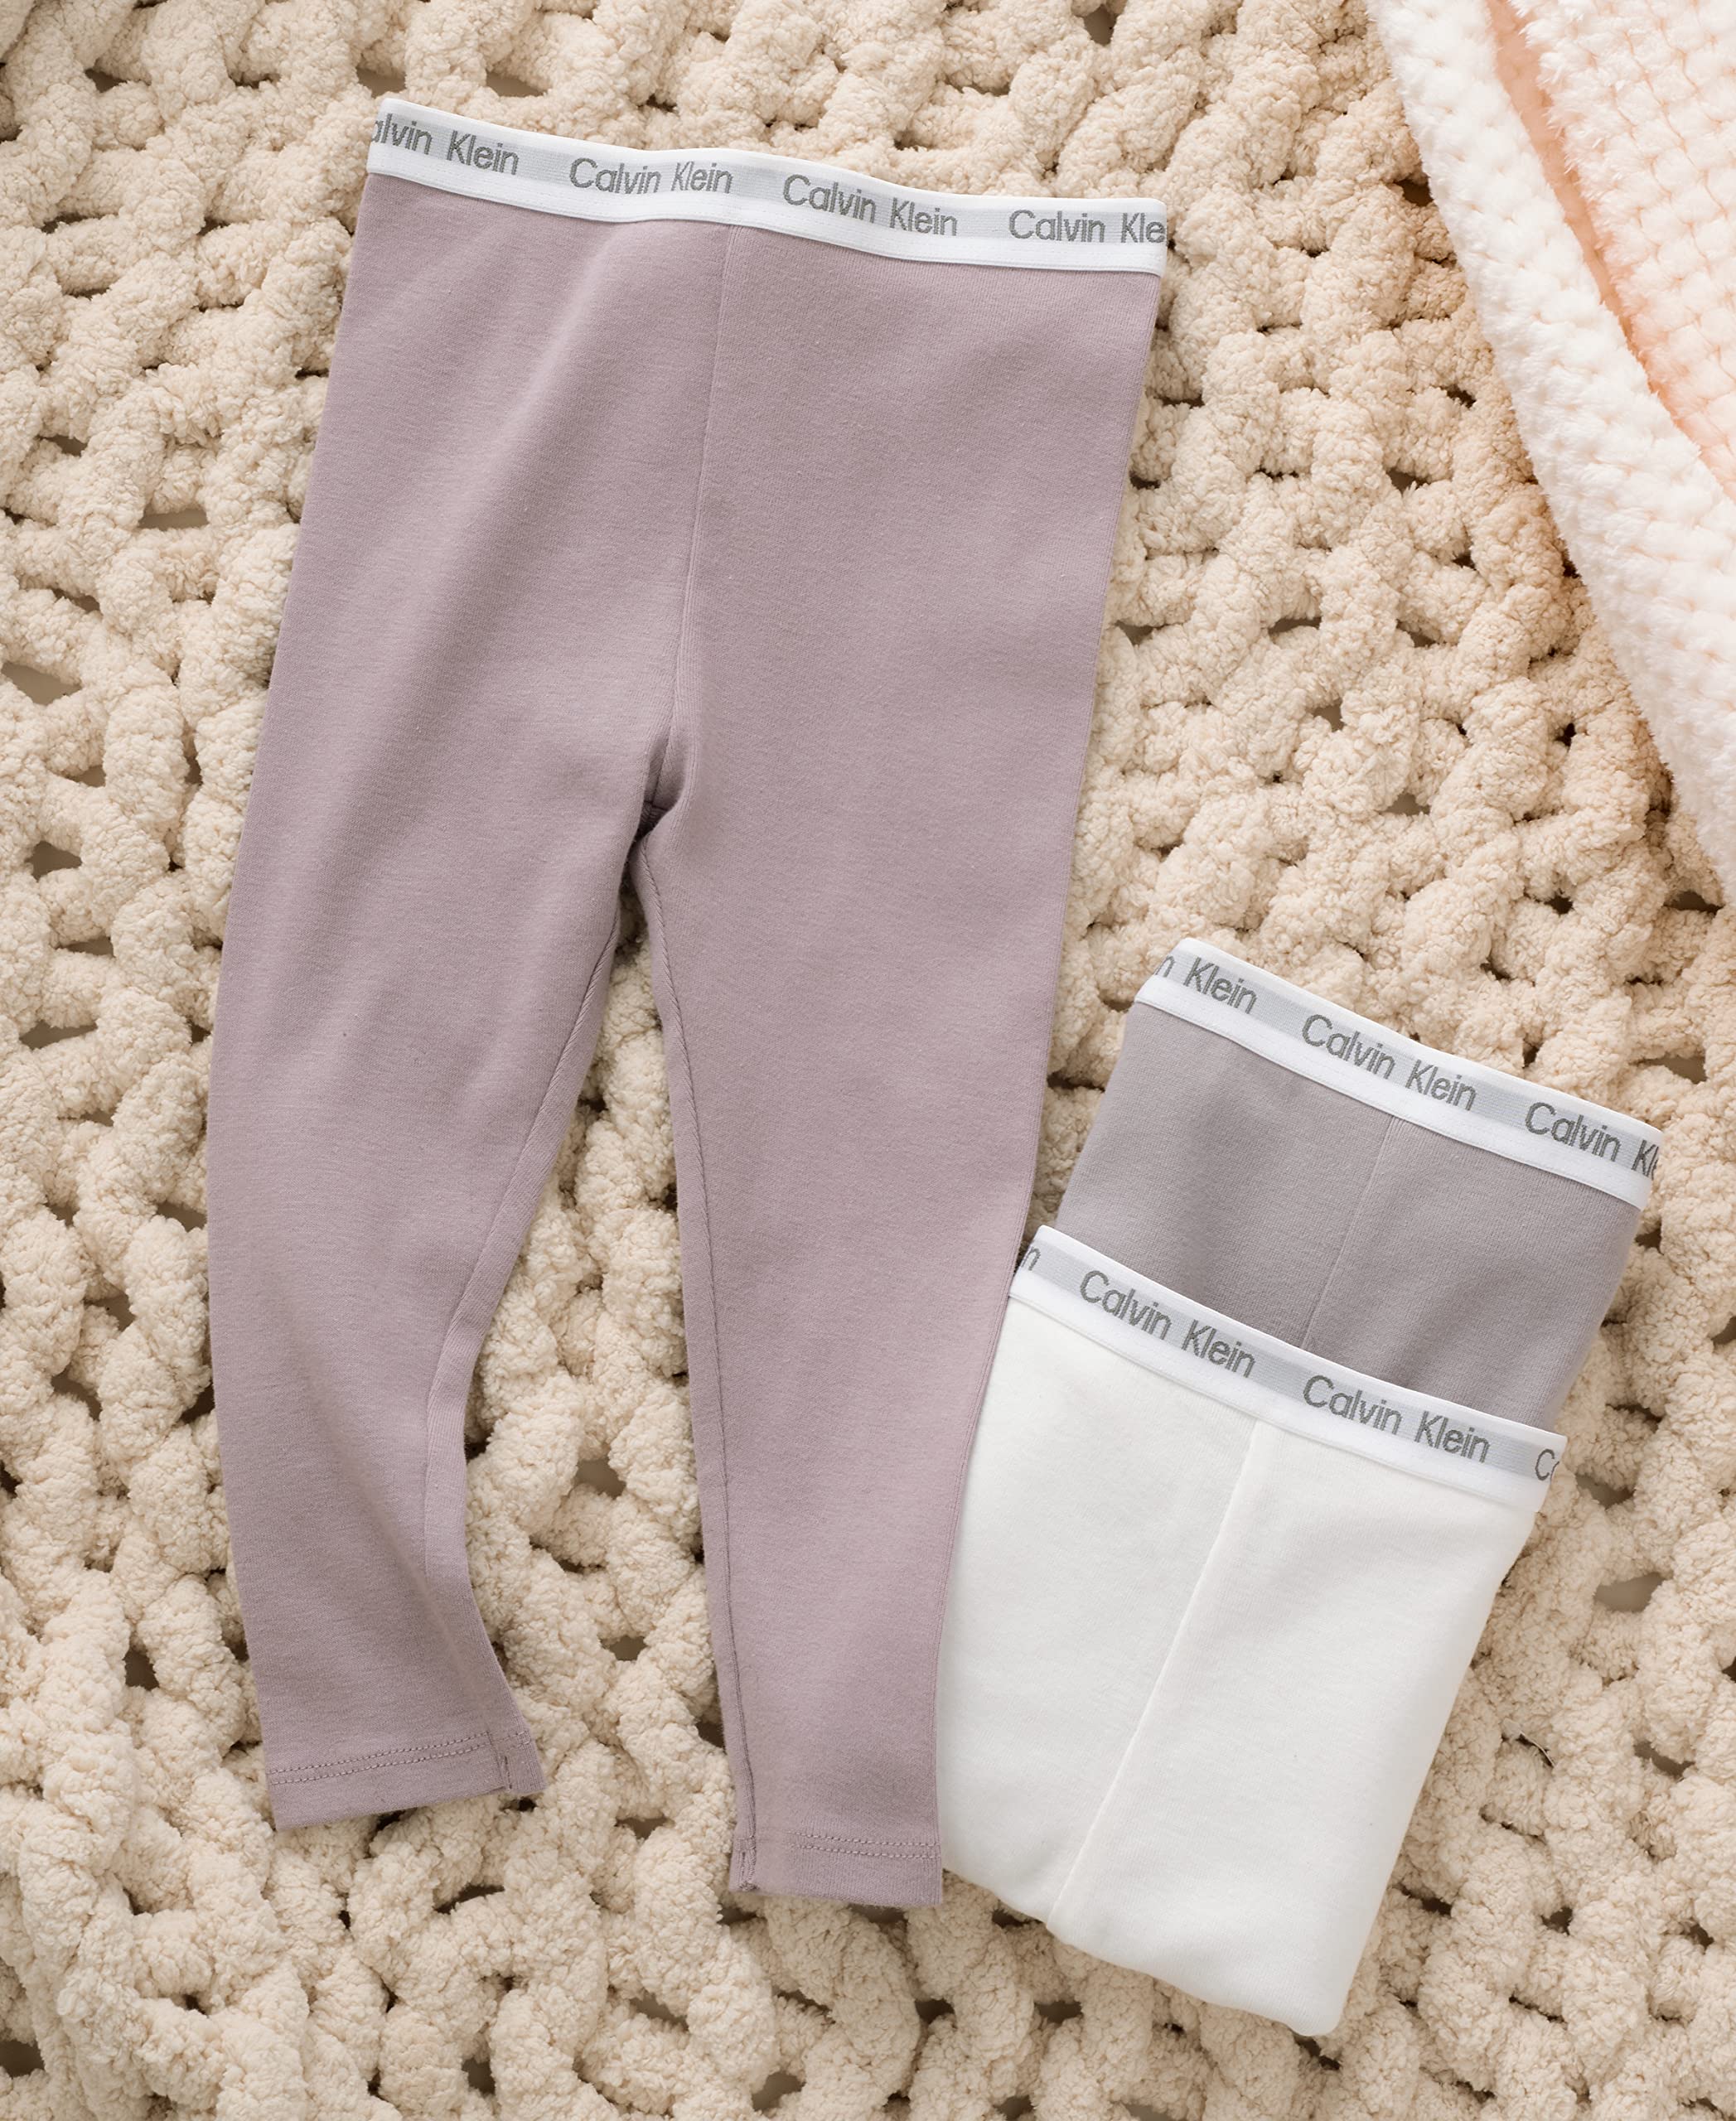 Calvin Klein Unisex Baby 3-Pack Cotton Pants, Everyday Casual Wear, Ultra-Soft & Comfortable Fit, Purple Dove/Egret/Gull, 0/3M